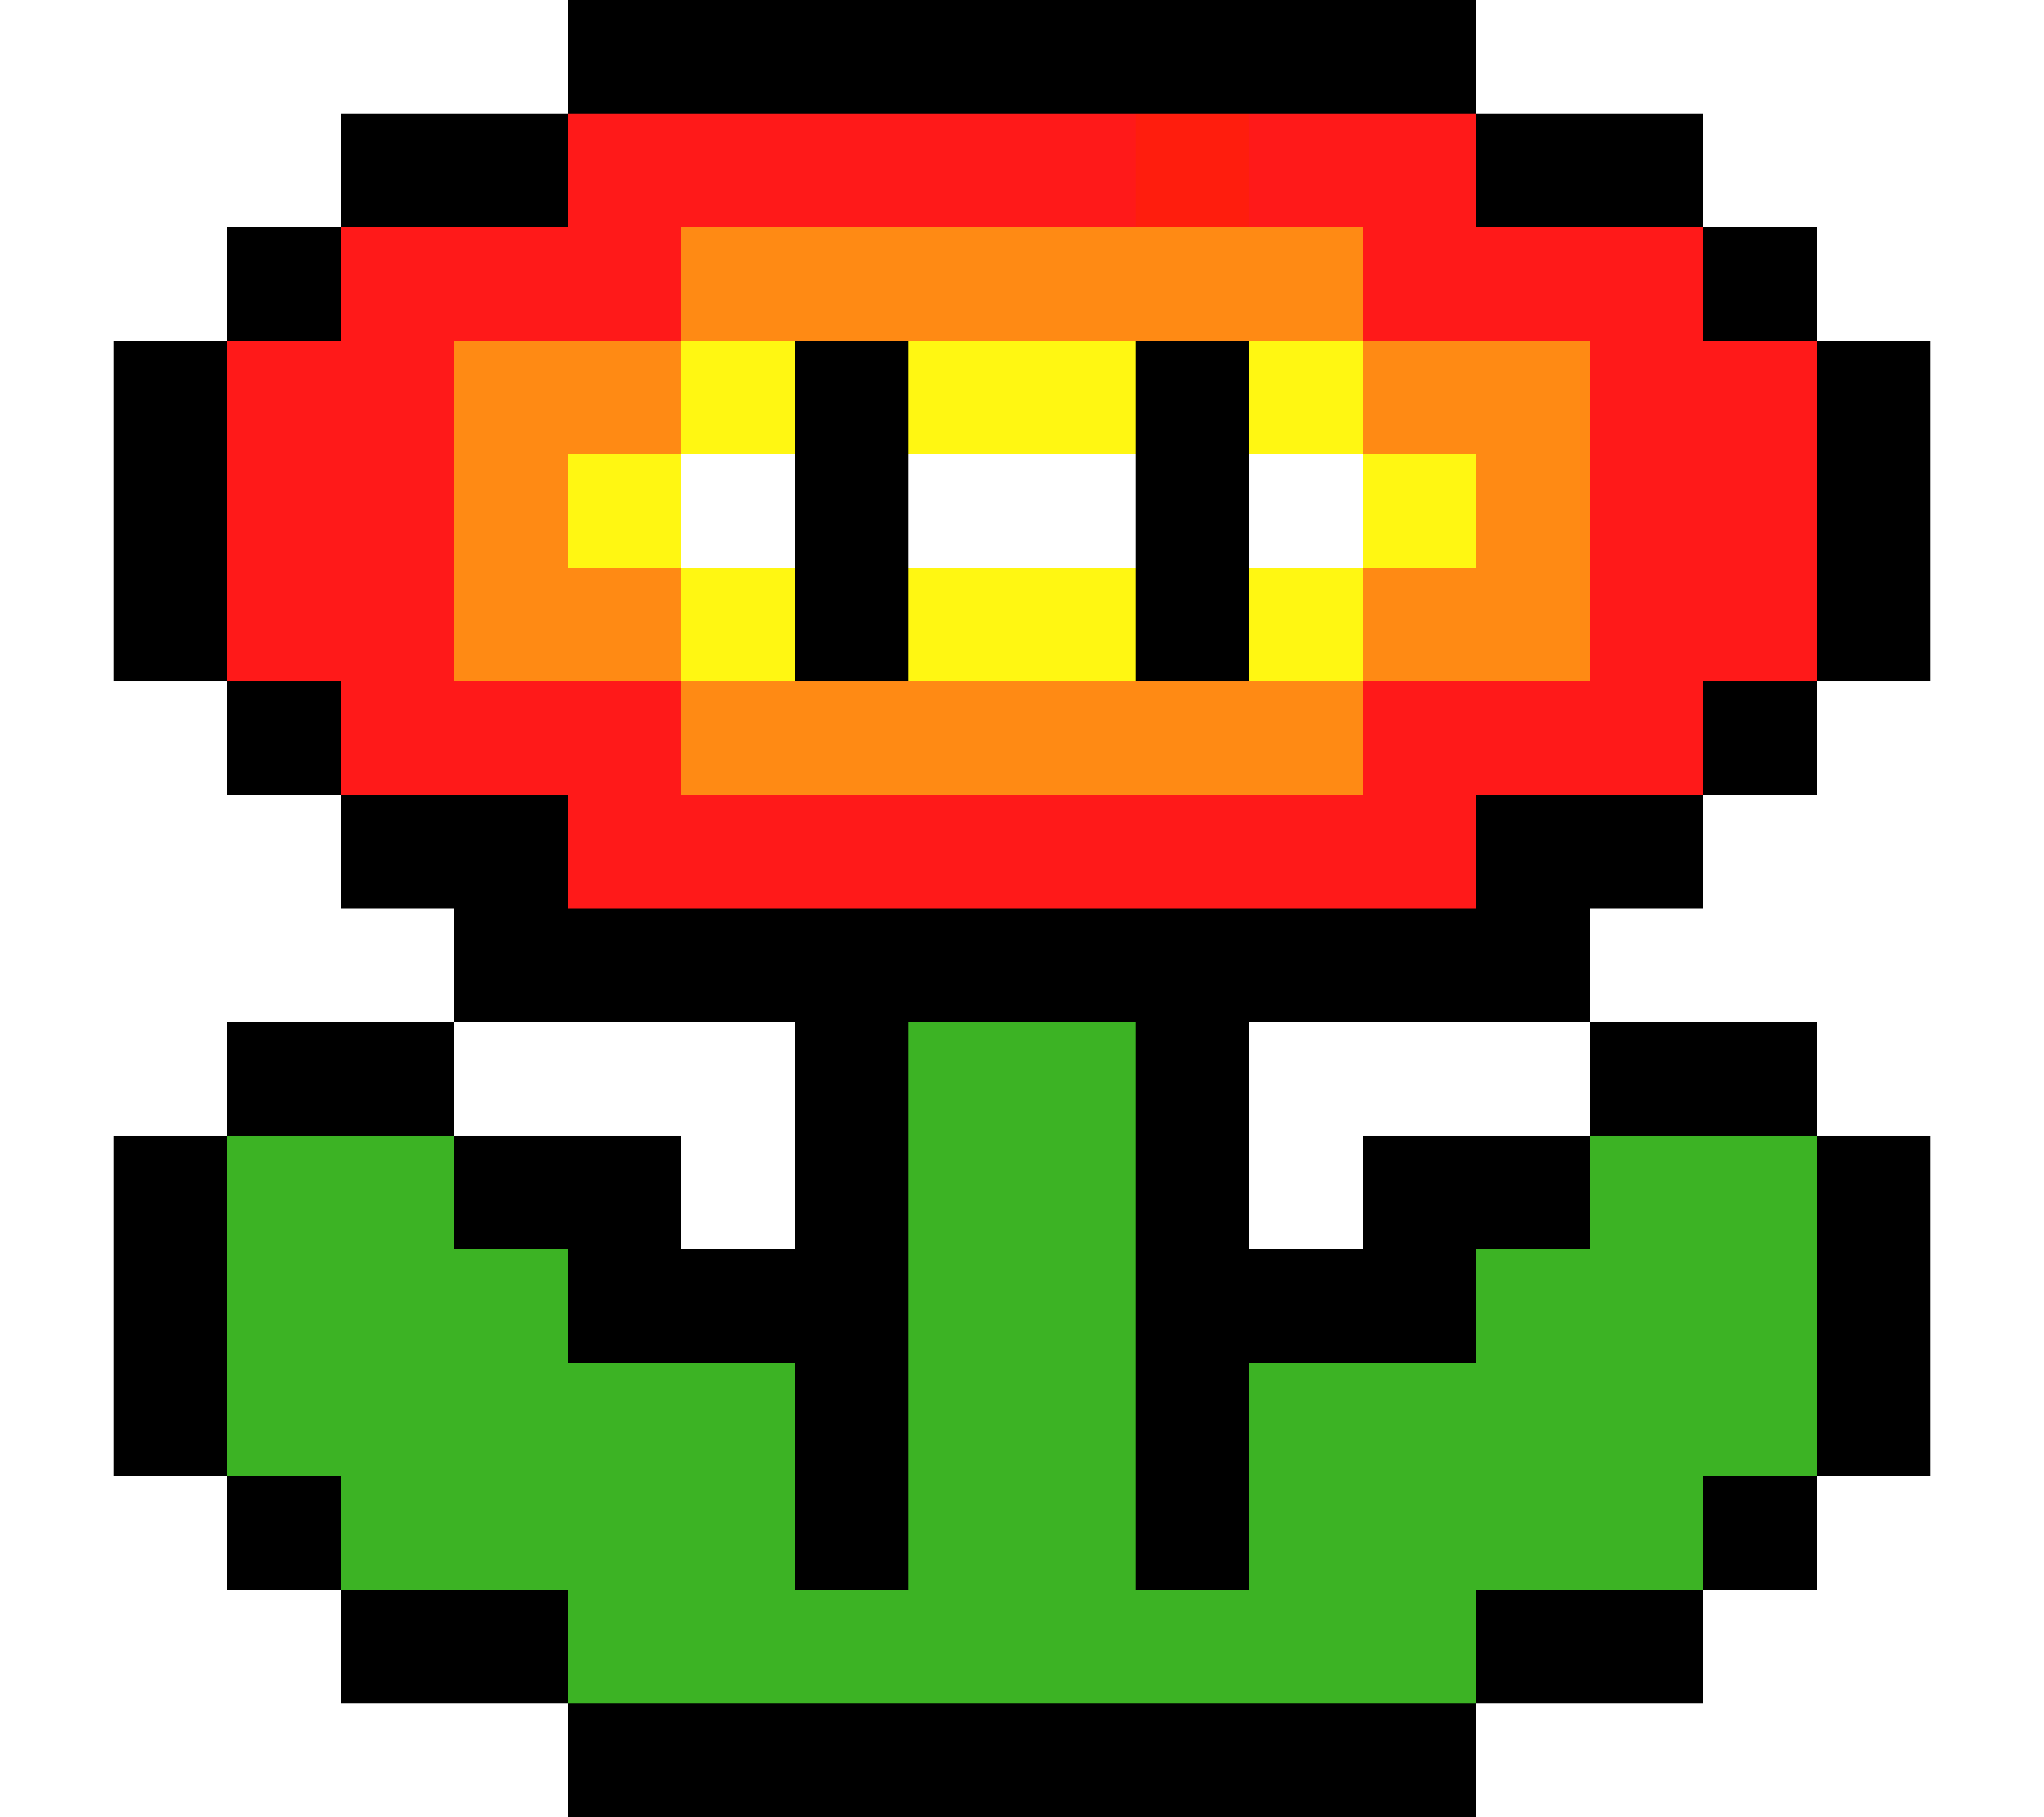 Download Flower Art Symmetry Area Mario Pixel HQ PNG Image in different ...